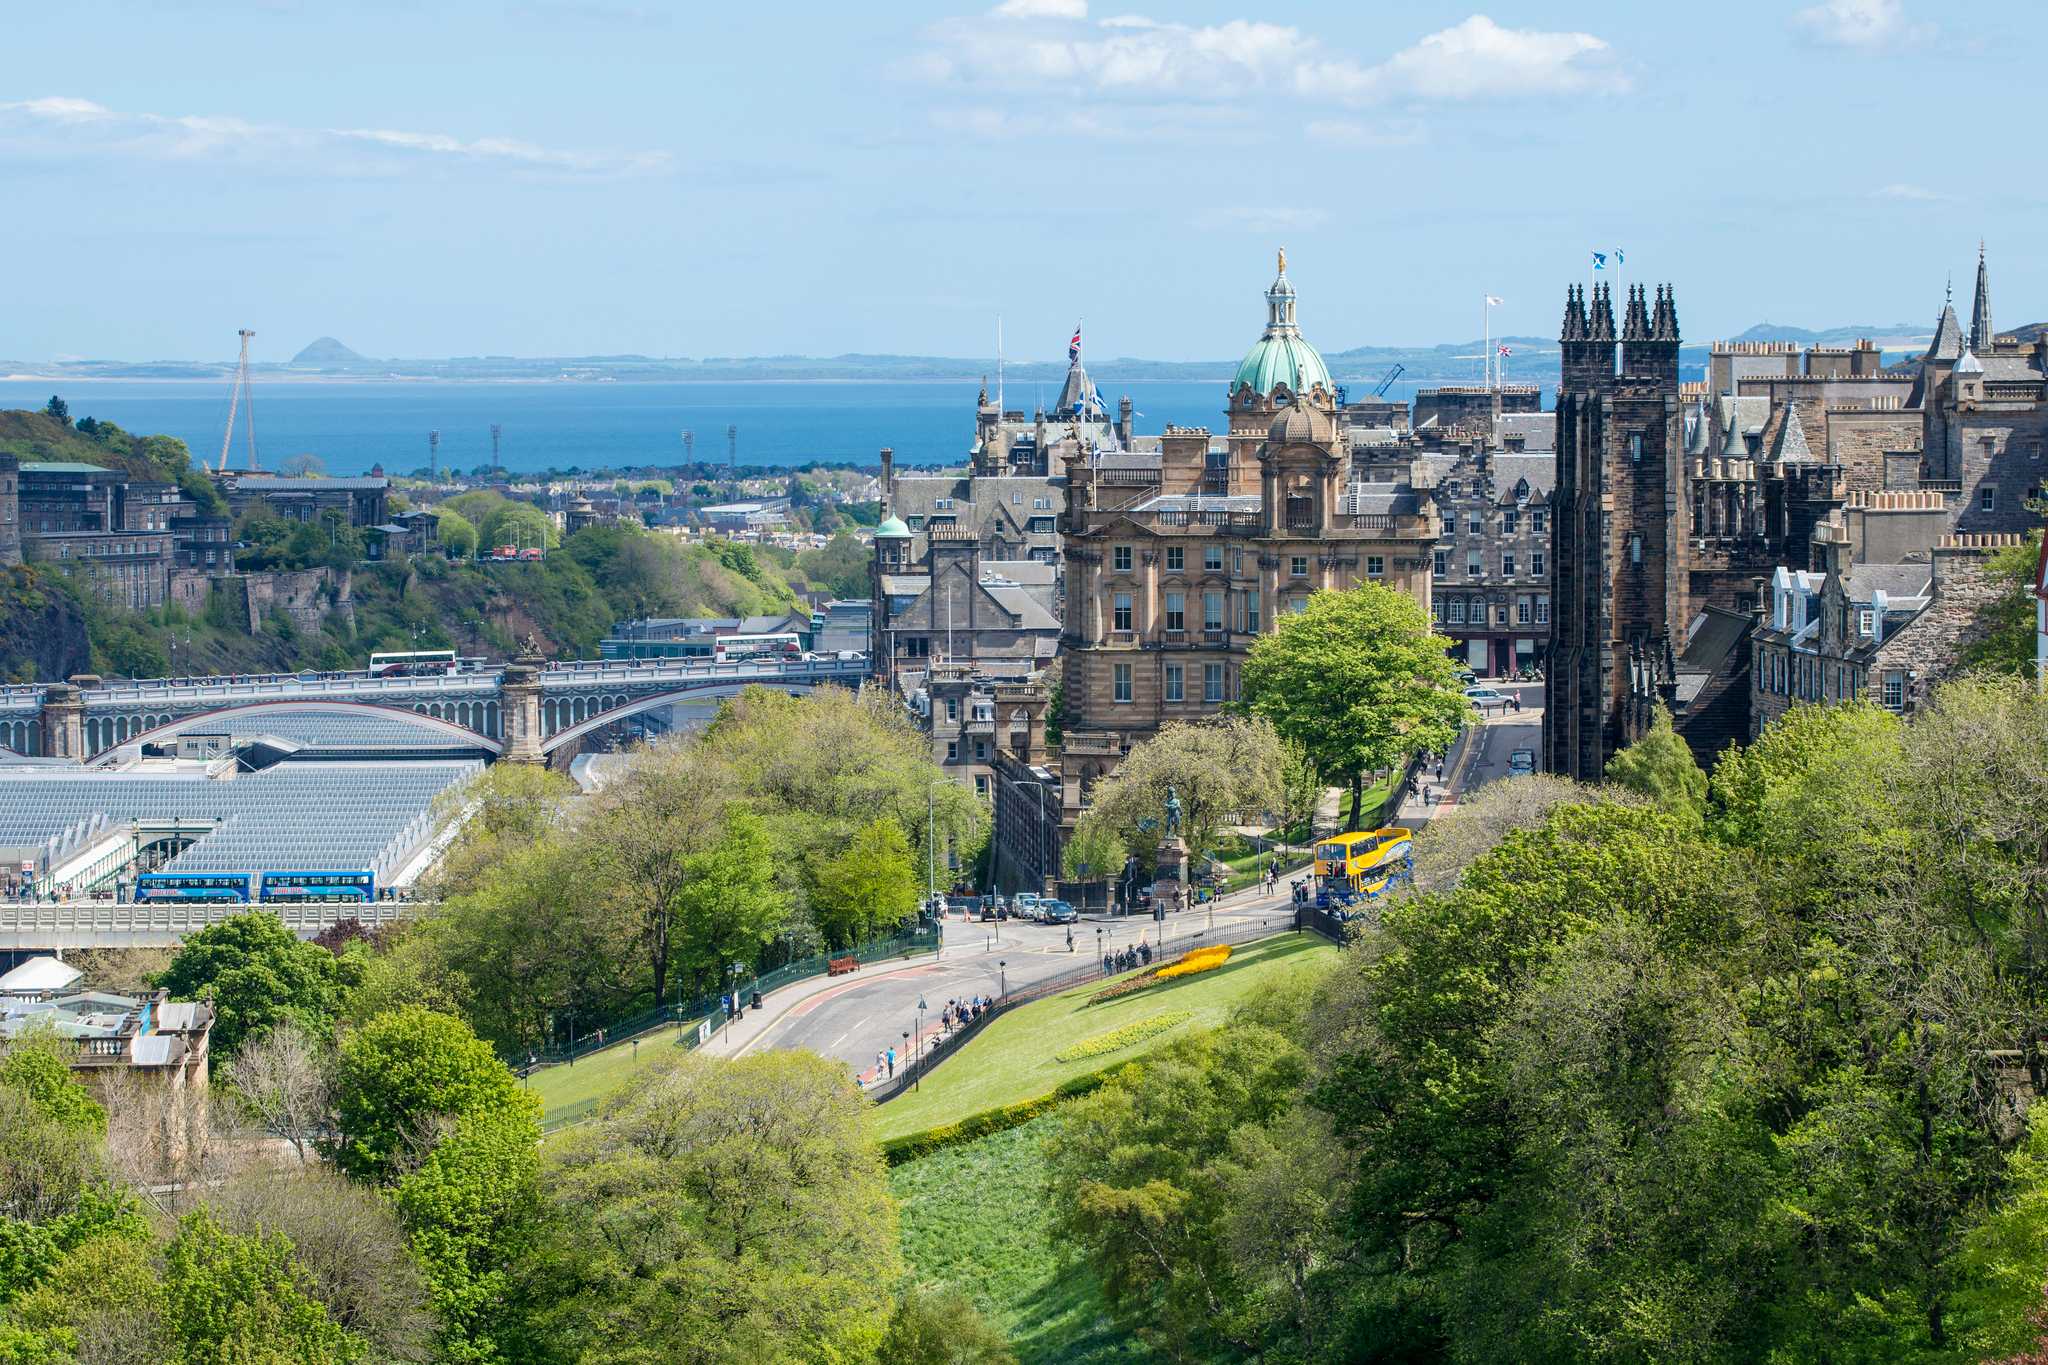 coach tours to scotland from london